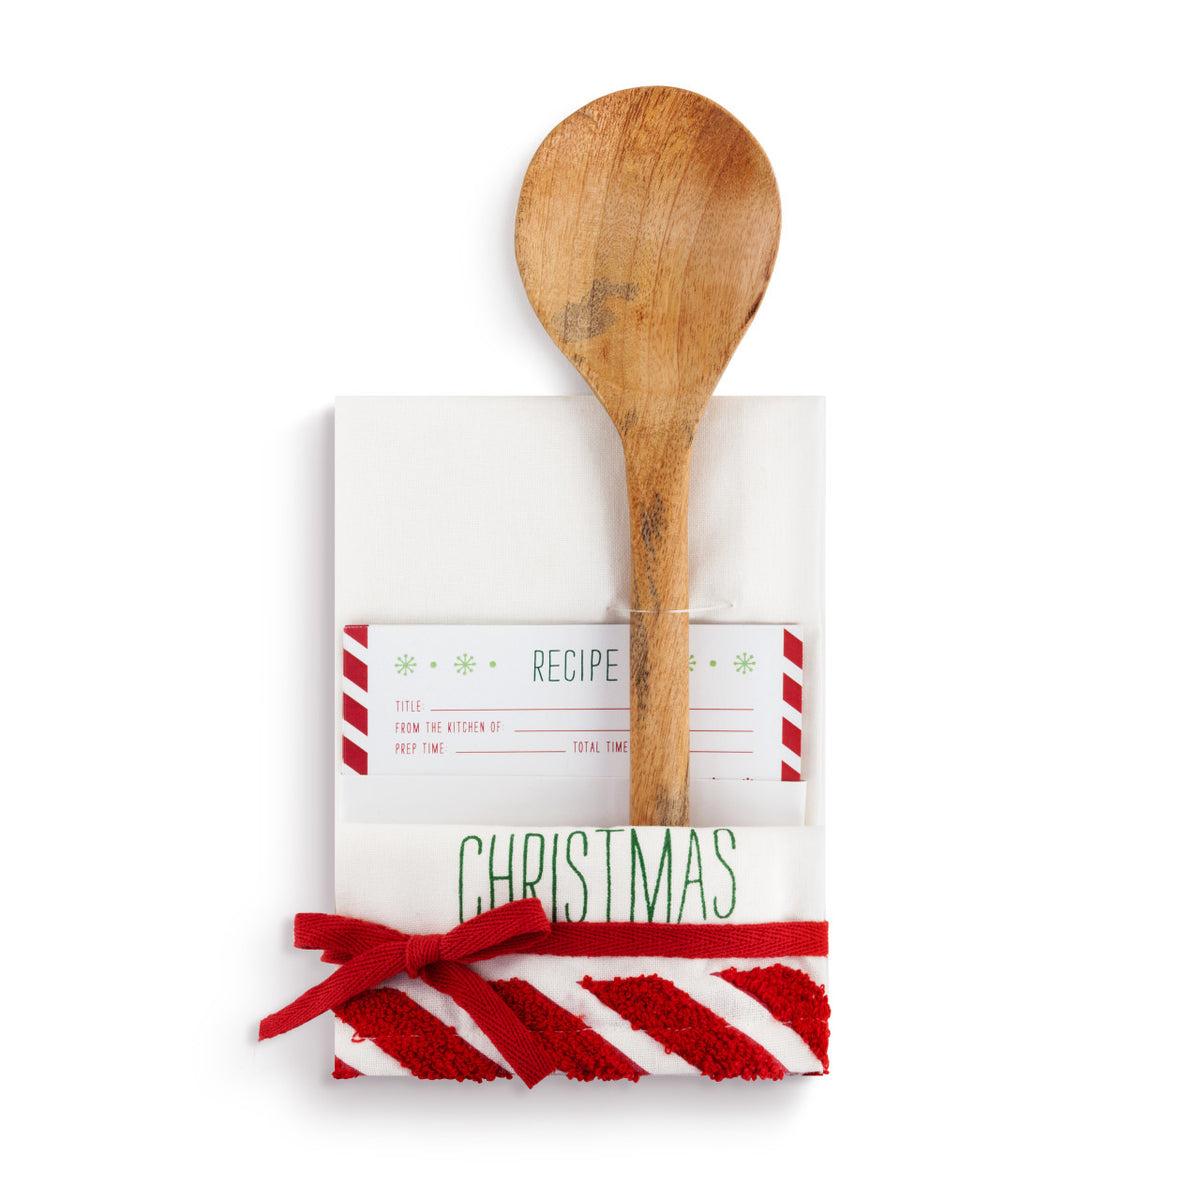 Merry Christmas Towel &amp; Spoon with Recipe Card Set